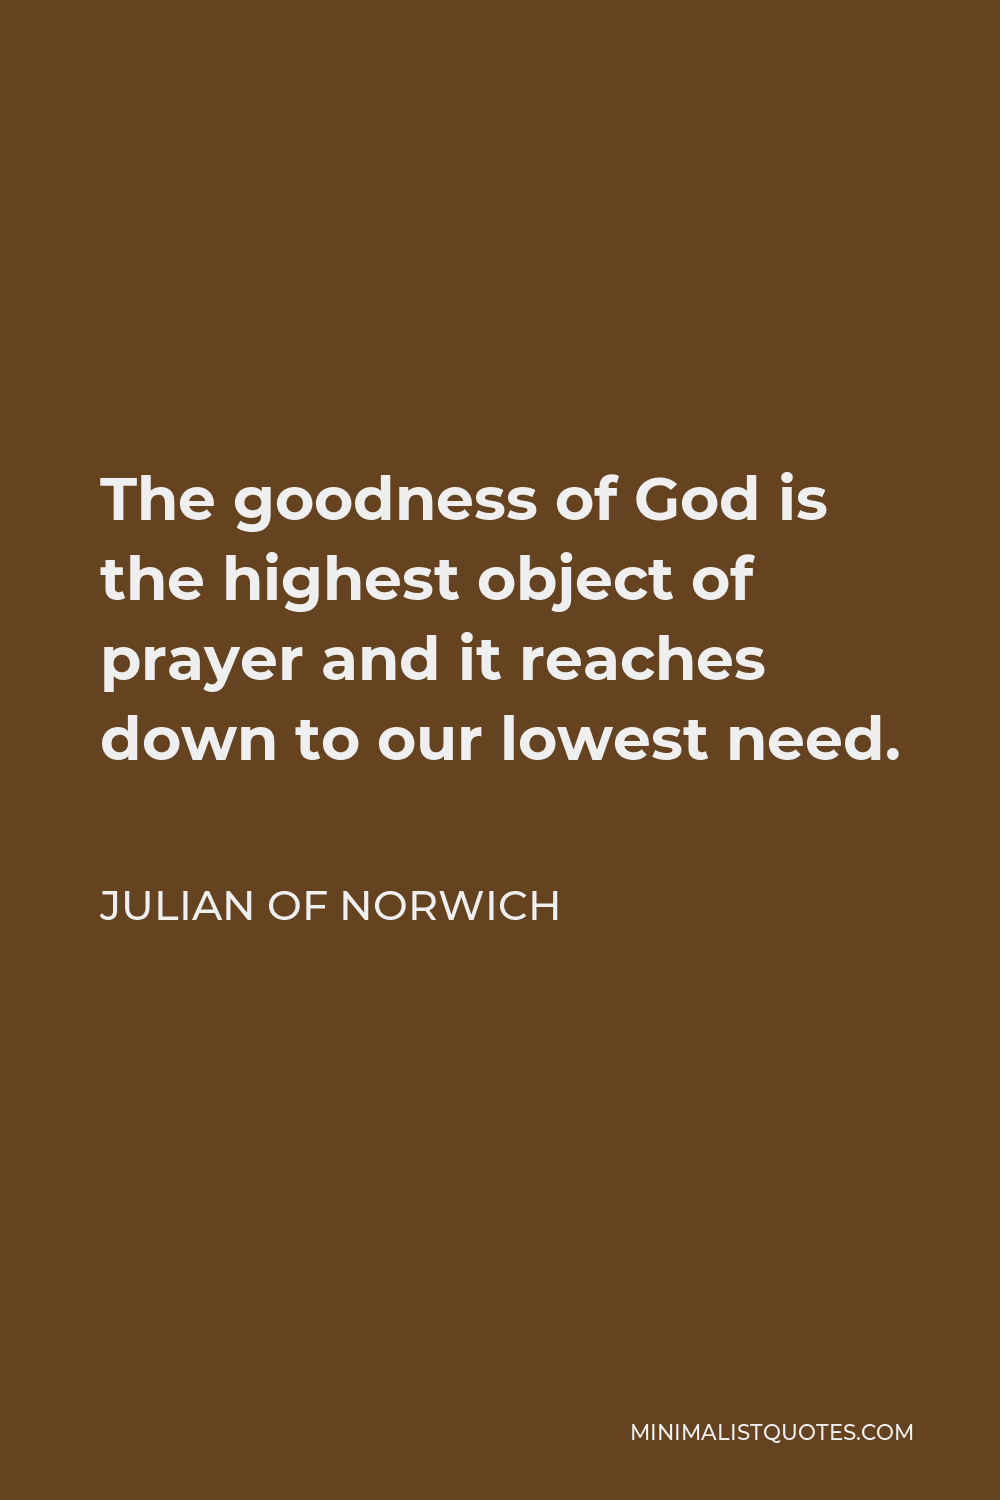 Julian of Norwich Quote - The goodness of God is the highest object of prayer and it reaches down to our lowest need.